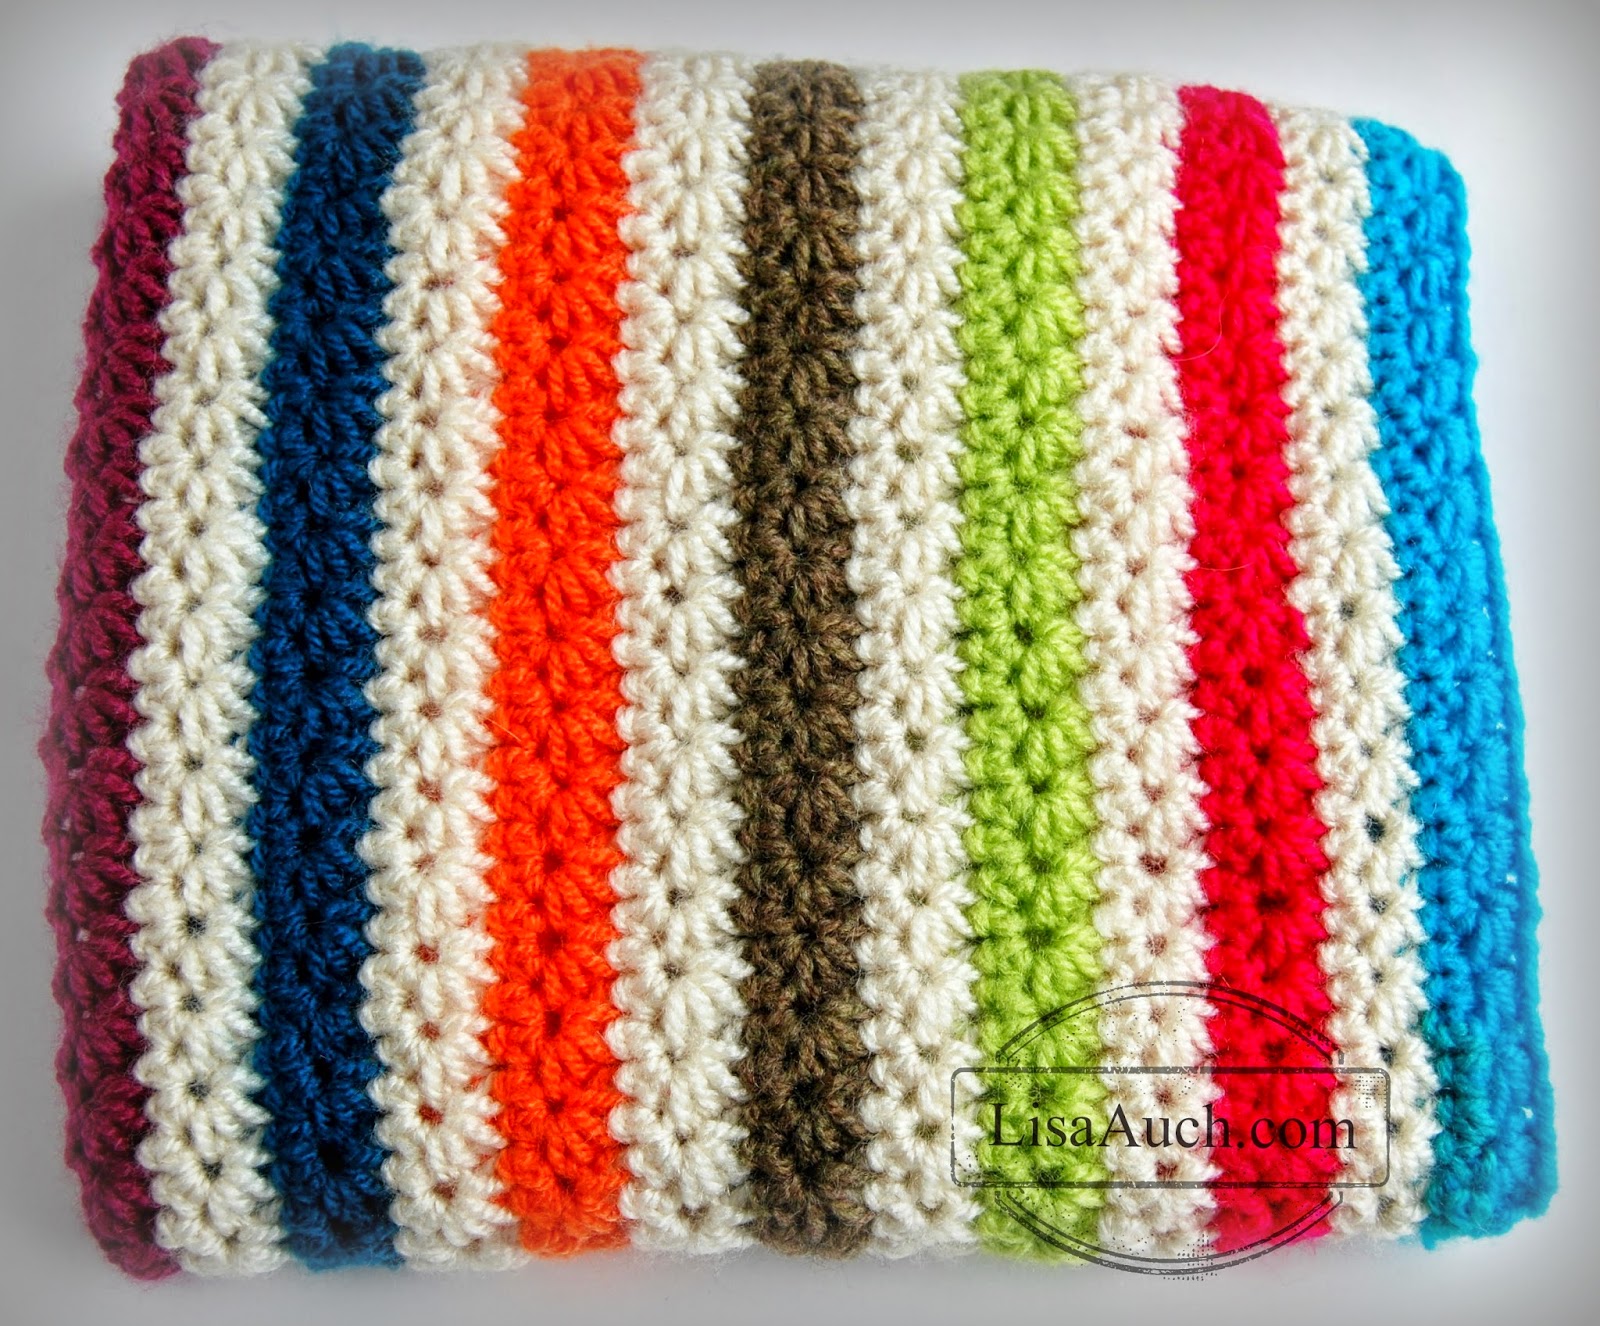 How to Crochet The Star Stitch and Crochet a Warm Cosy Blanket